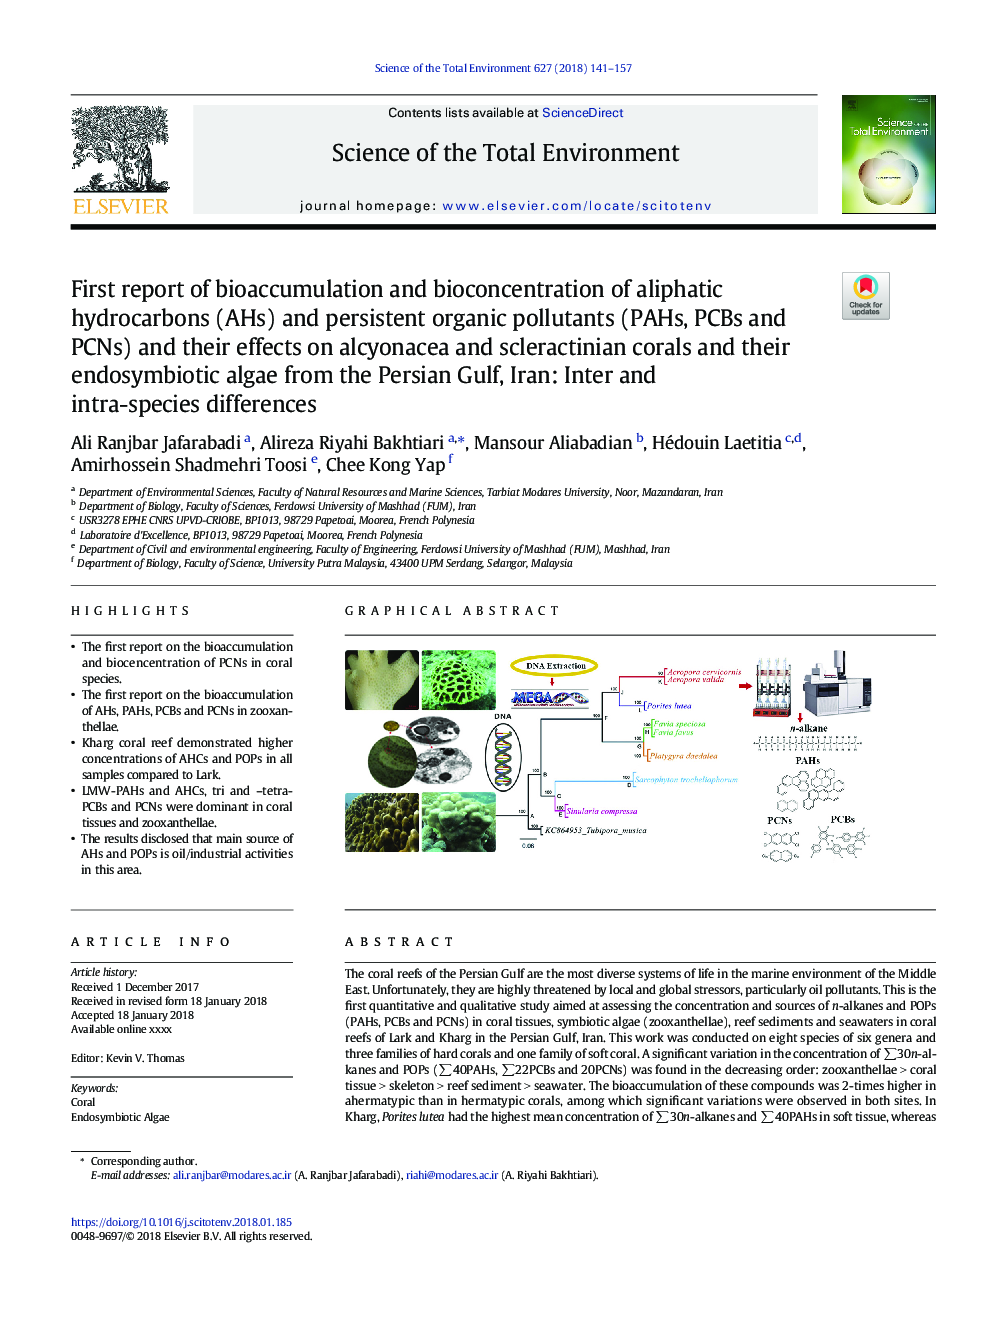 First report of bioaccumulation and bioconcentration of aliphatic hydrocarbons (AHs) and persistent organic pollutants (PAHs, PCBs and PCNs) and their effects on alcyonacea and scleractinian corals and their endosymbiotic algae from the Persian Gulf, Iran